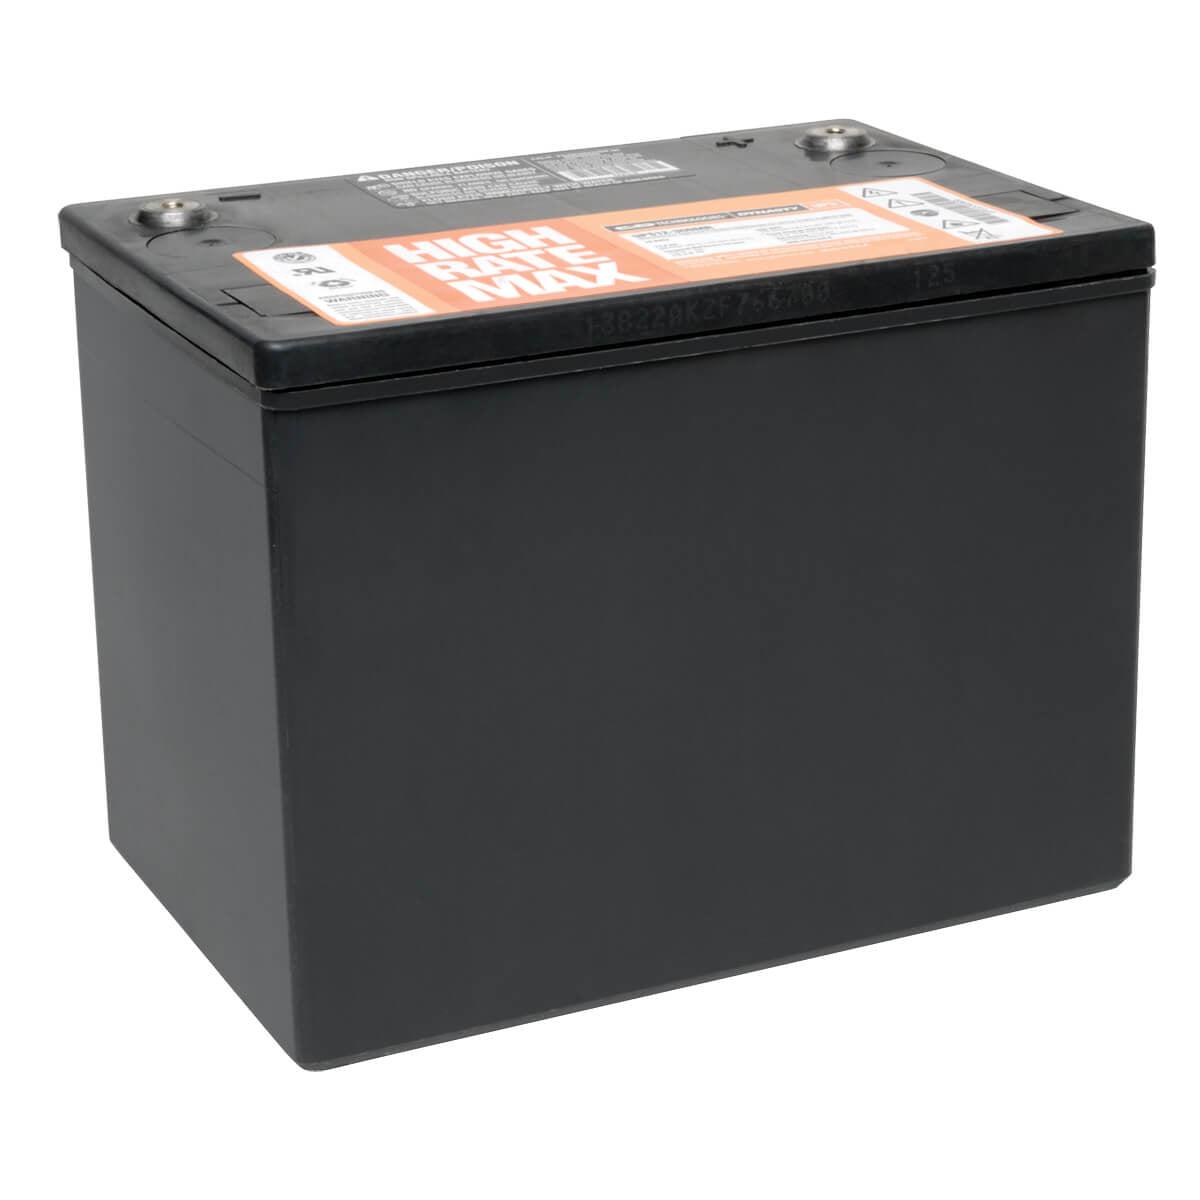 Tripp Lite 98-121 12Vdc Sealed, Maintenance-Free Battery For All Inverter/Chargers, 12Vdc Battery Connections